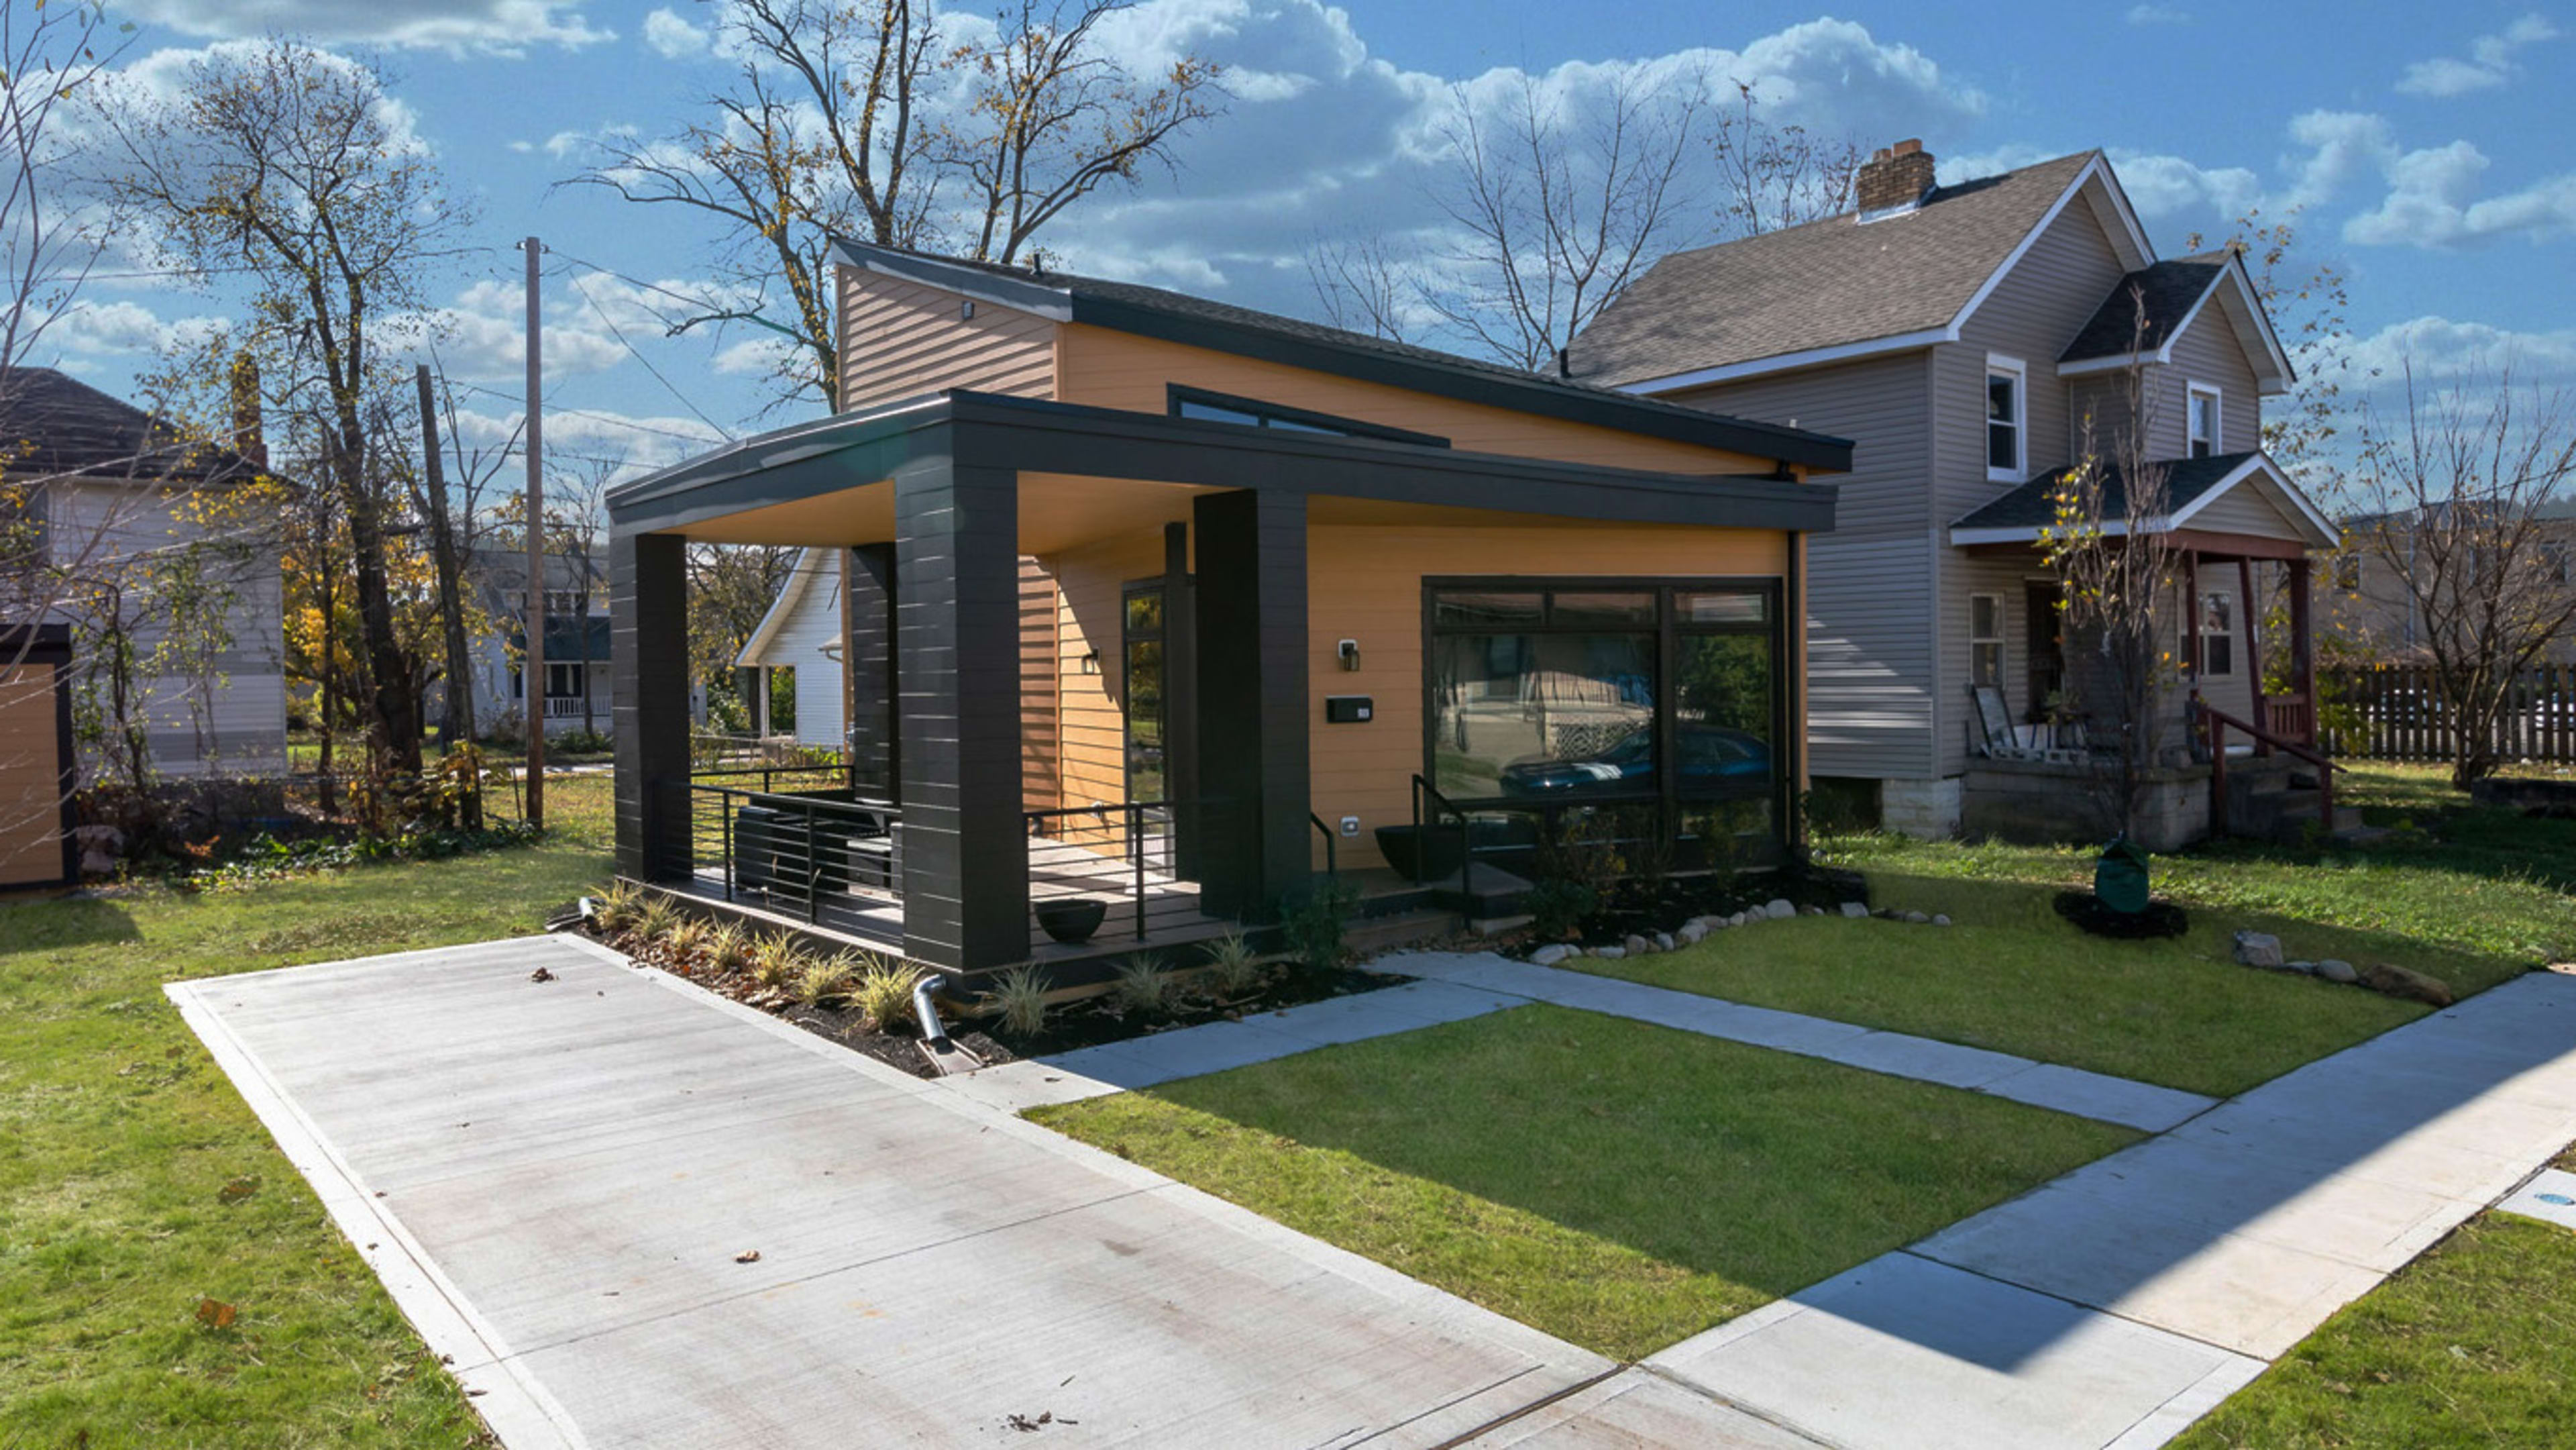 This architecture firm is giving away a house everywhere it works